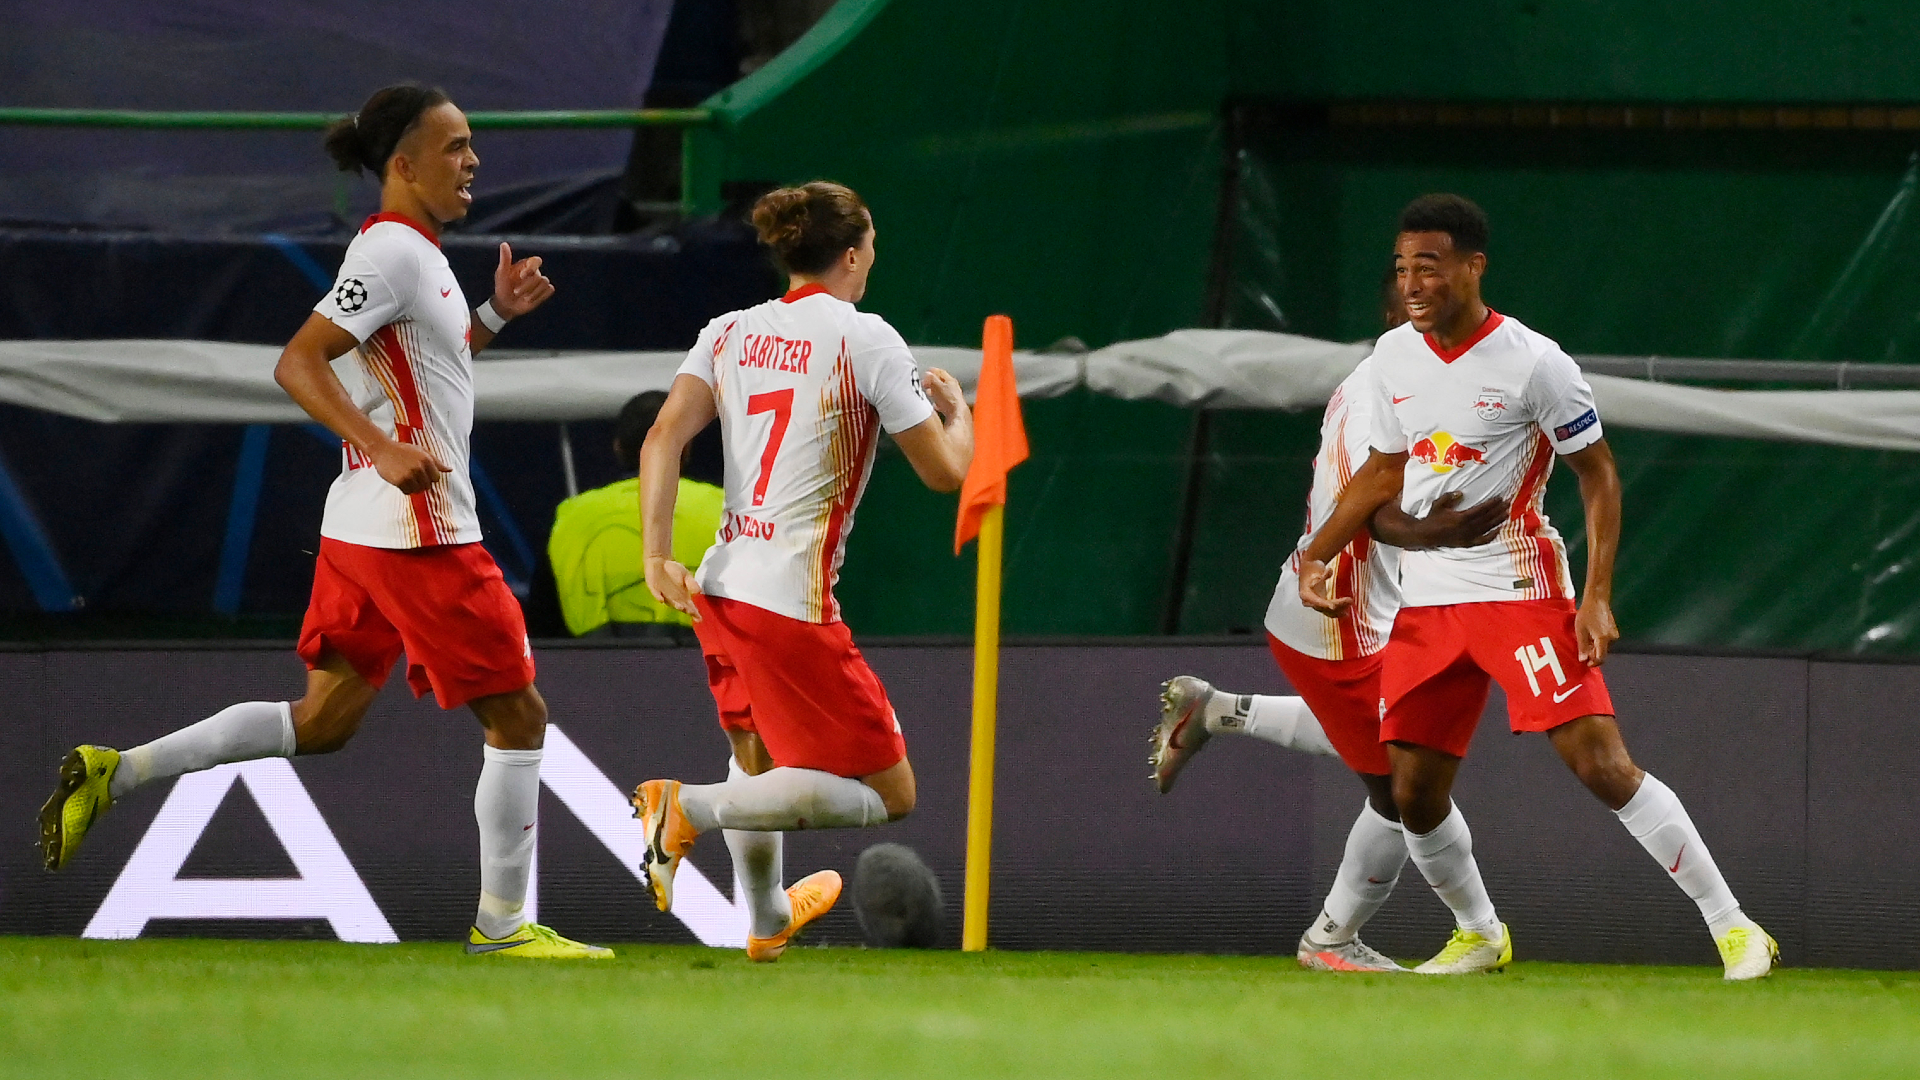 RB Leipzig's rise has delighted Yussuf Poulsen after they reached the Champions League semi-finals.